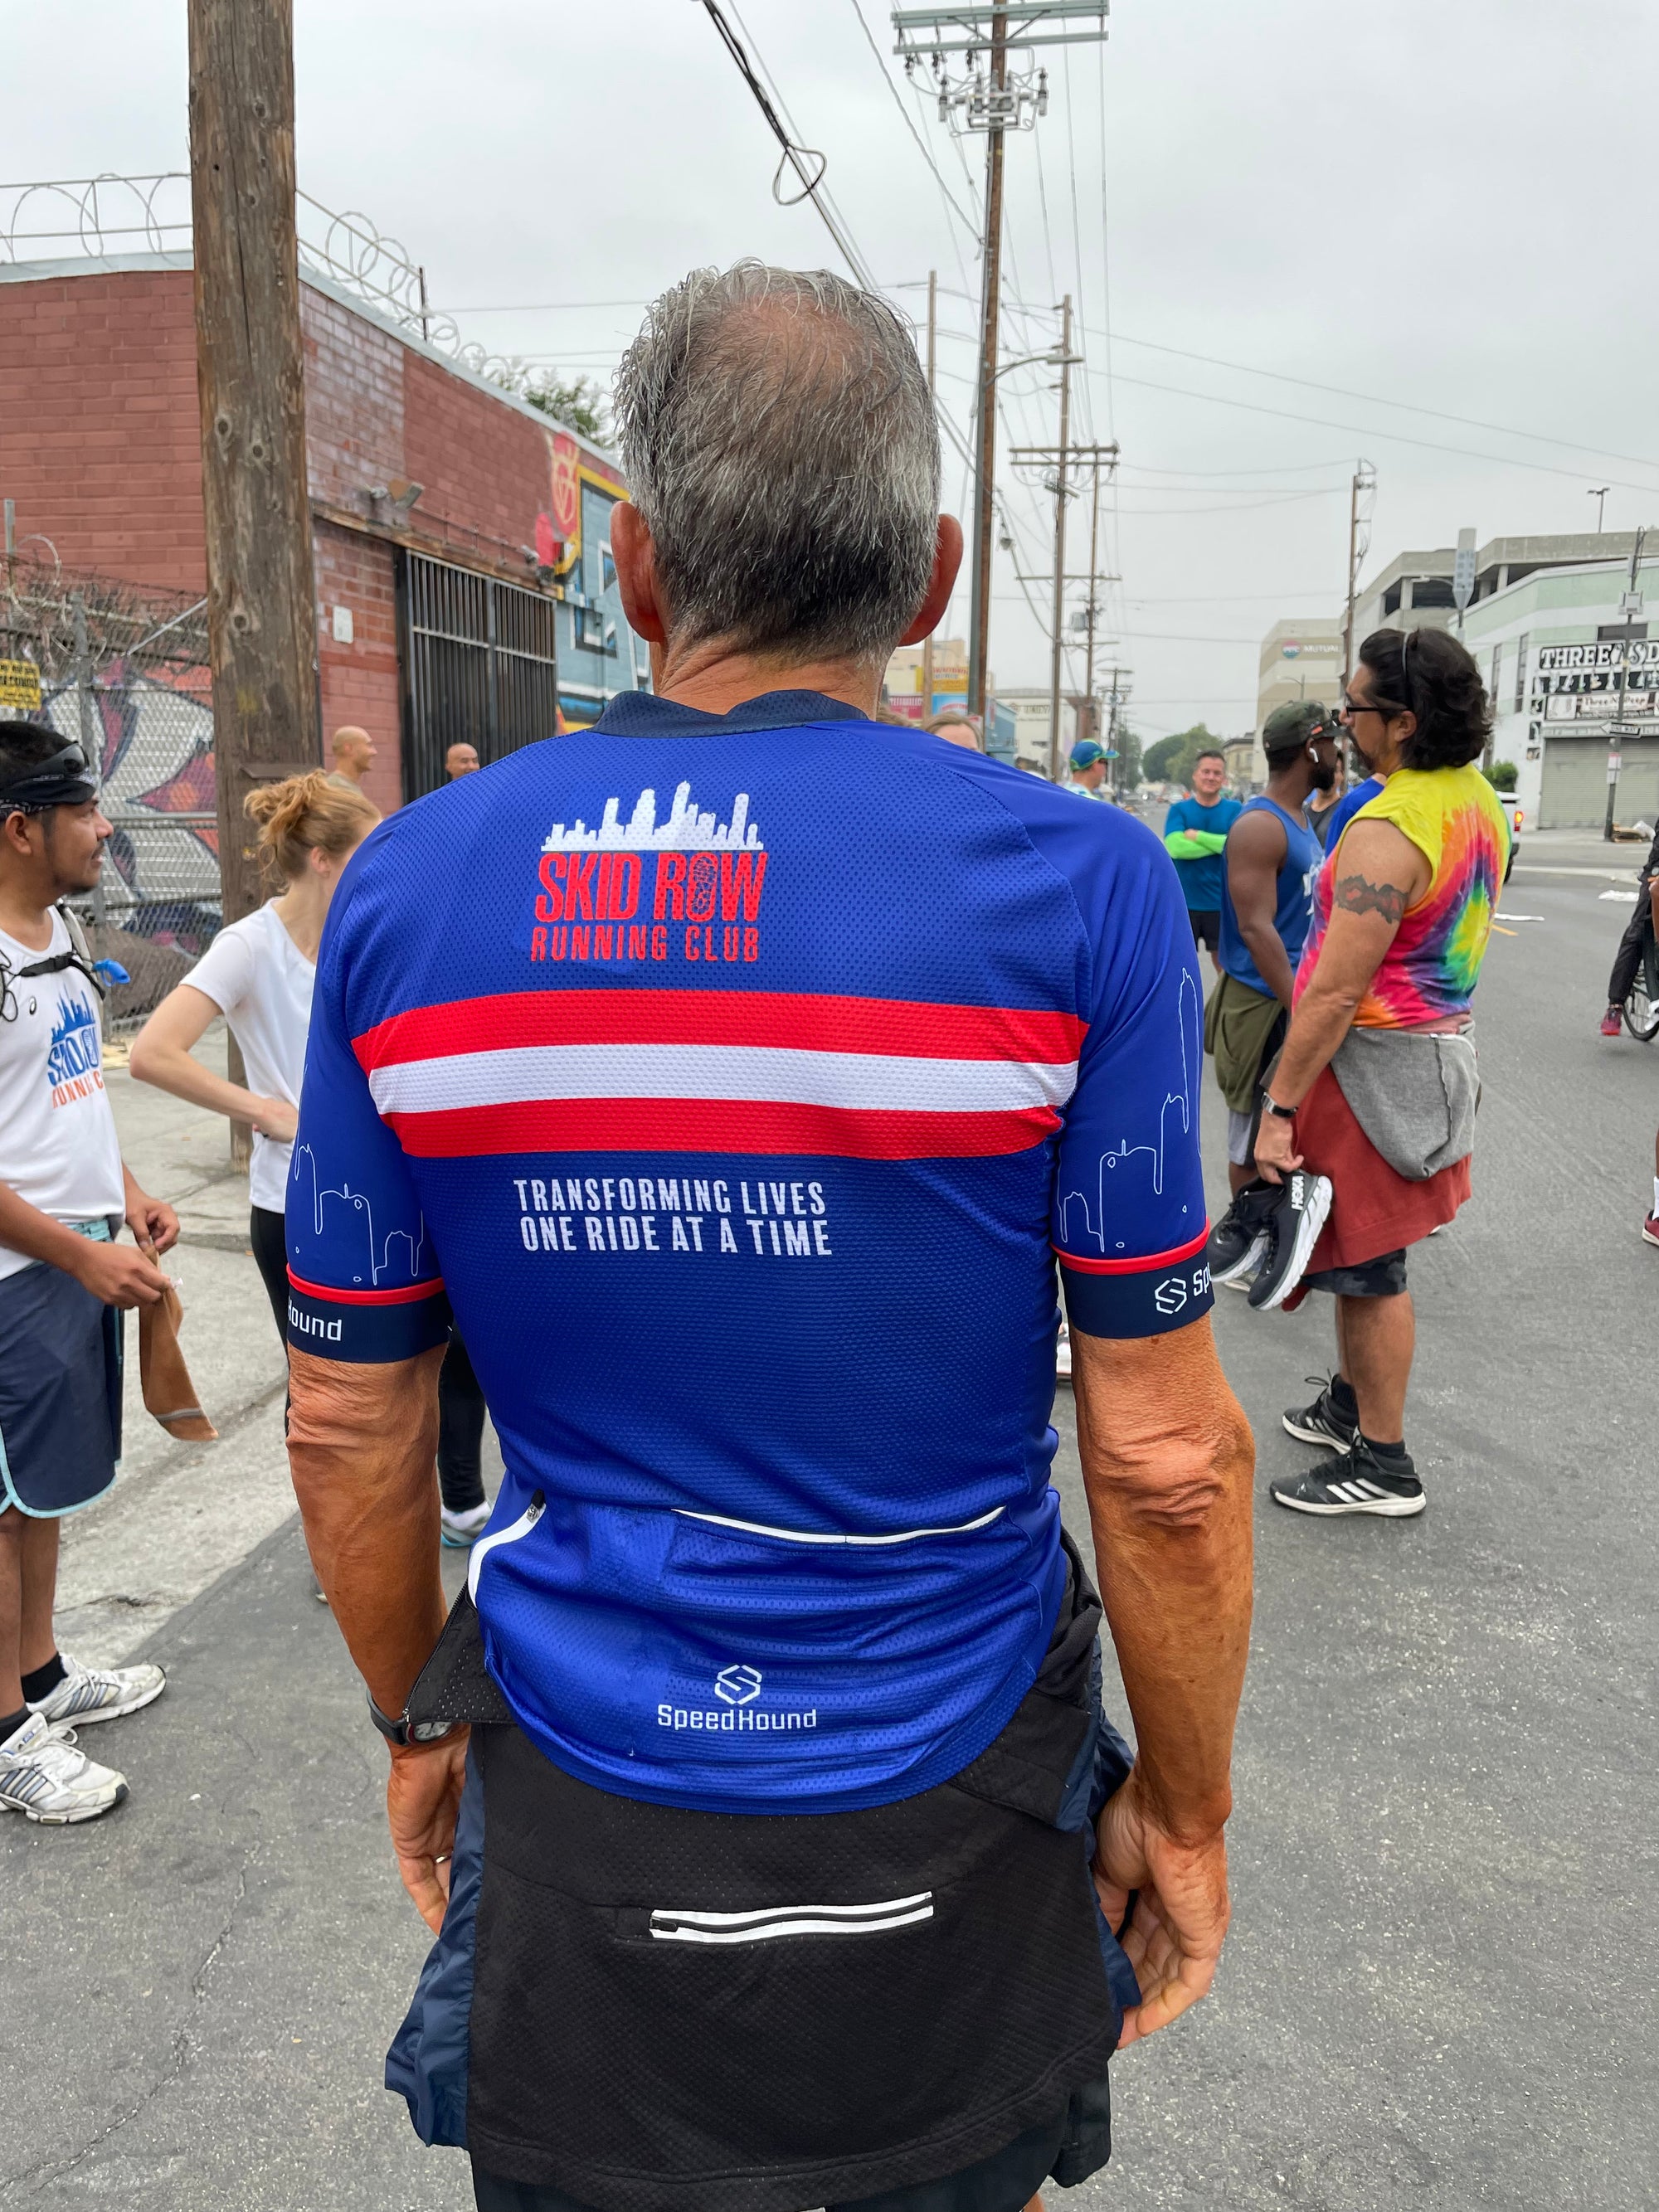 Limited Edition Skid Row Men's Cycling Jersey